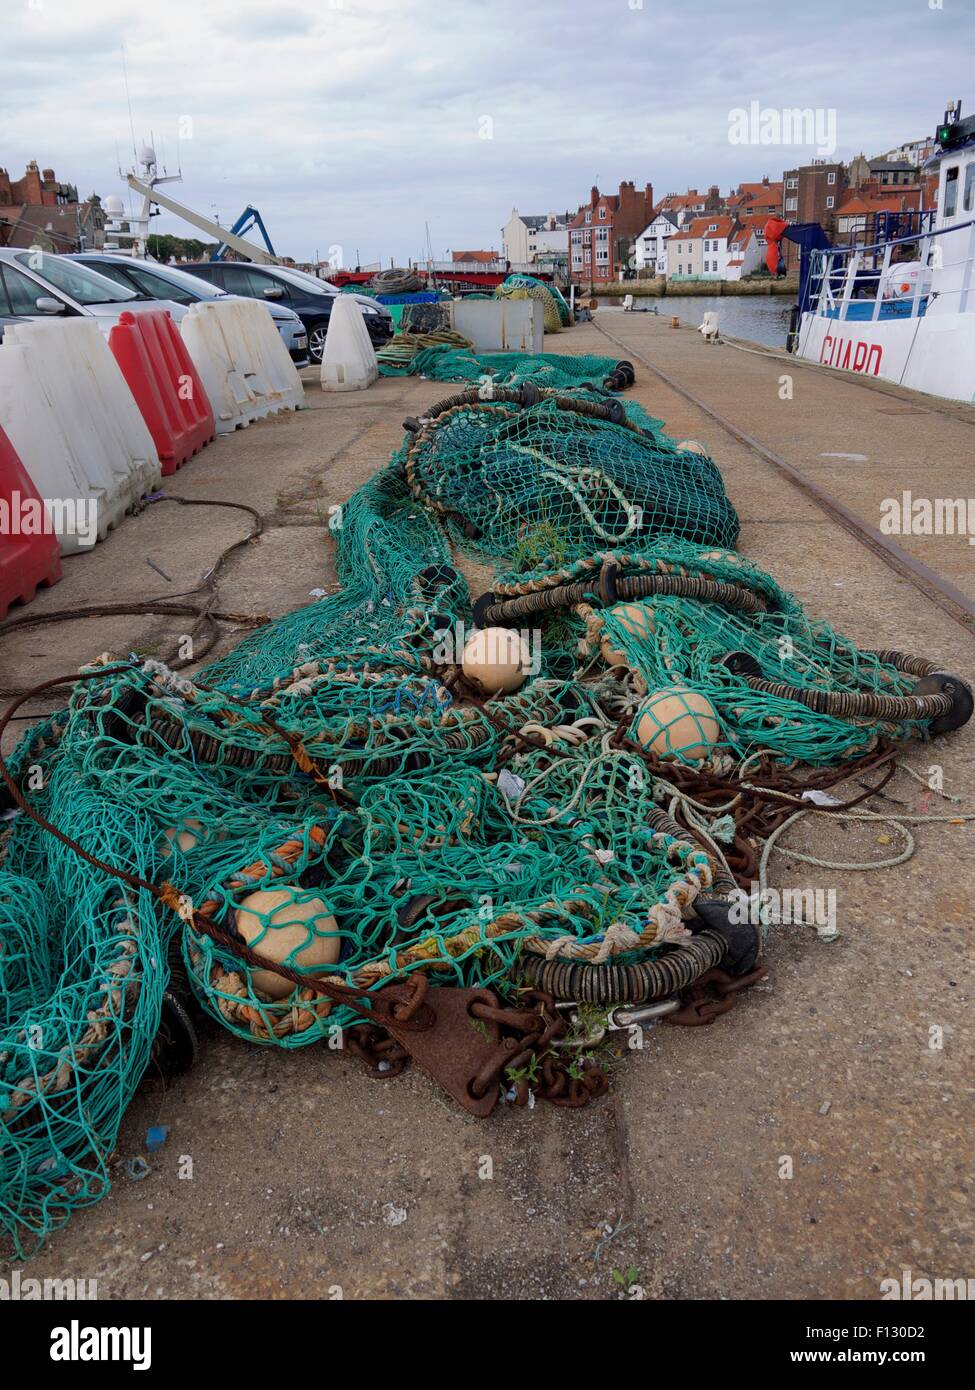 Fishing net in a long line on dry land Stock Photo